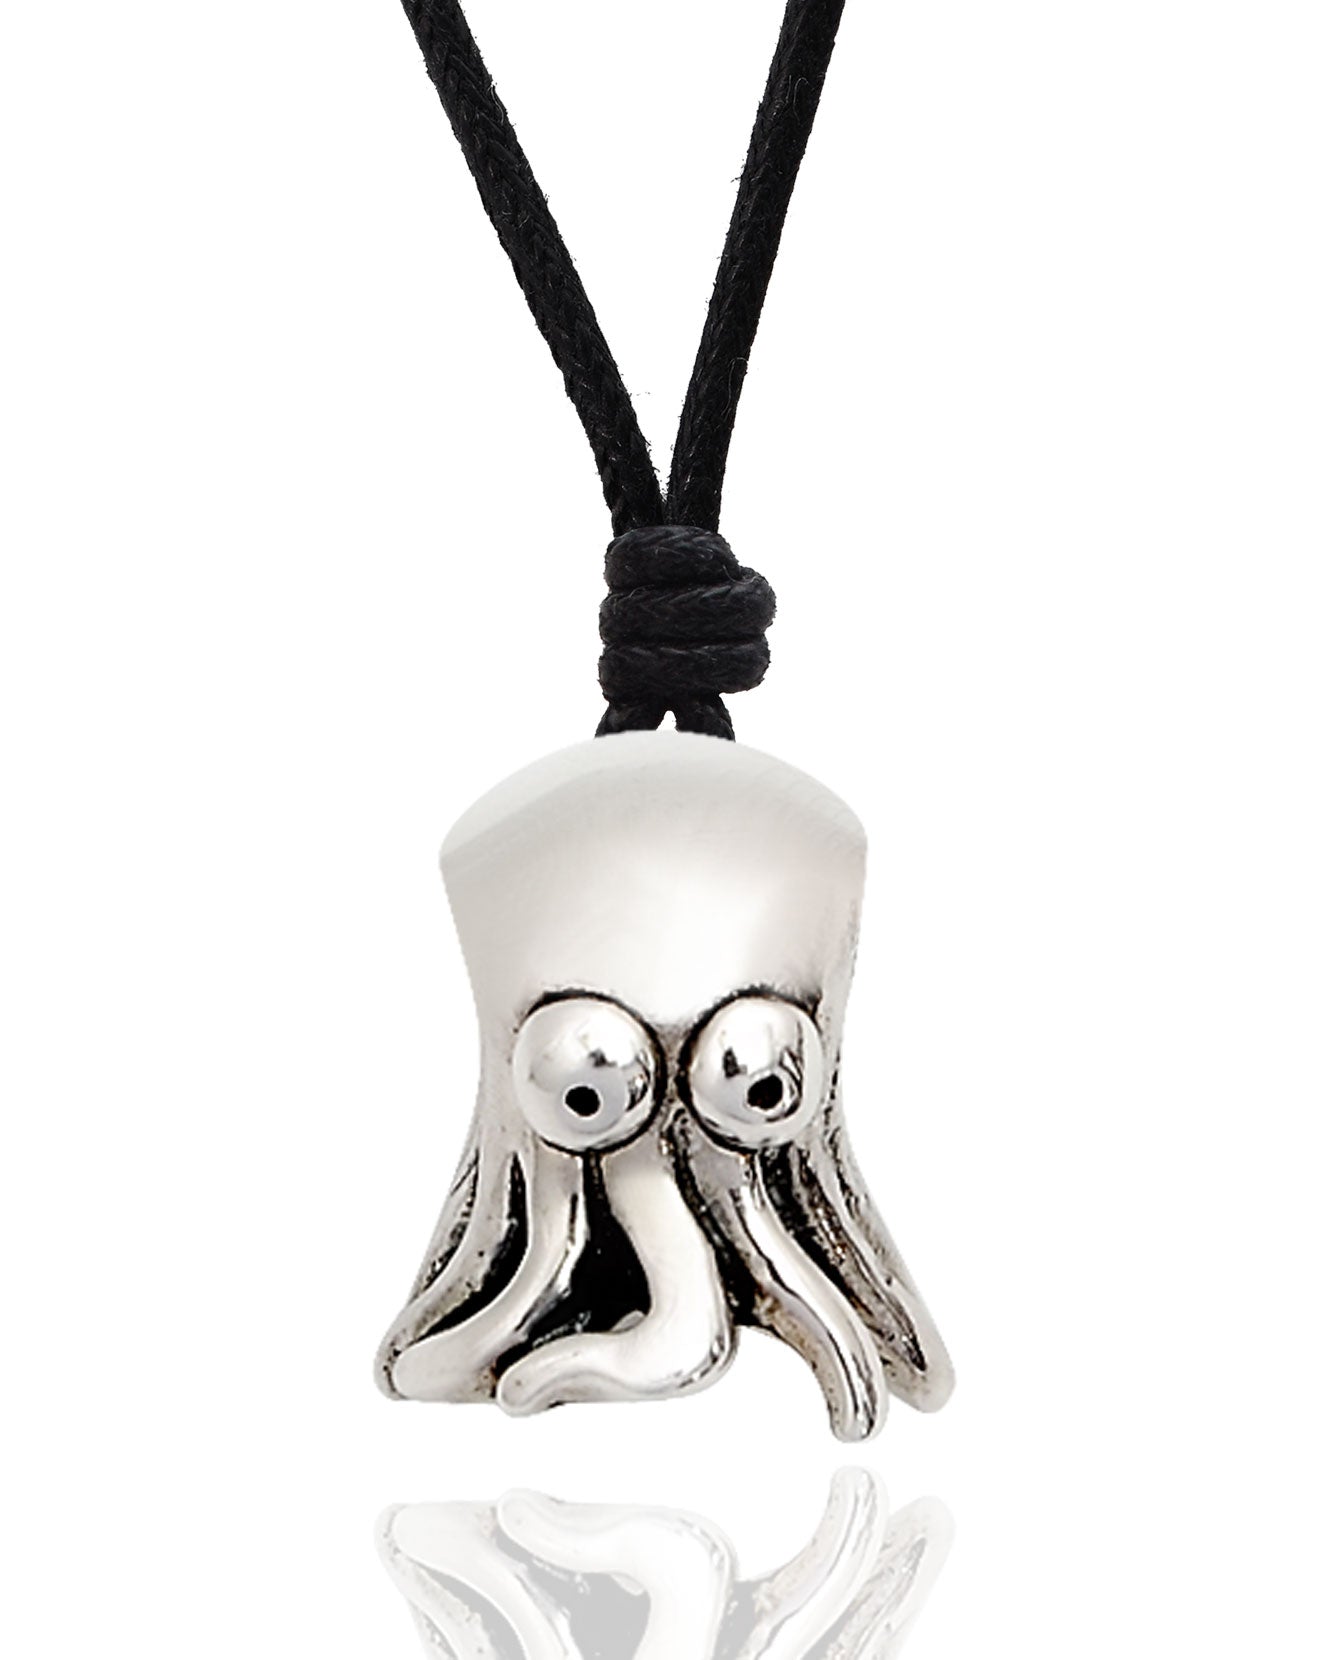 Cute Octopus 92.5 Sterling Silver Pewter Brass Charm Necklace Pendant Jewelry